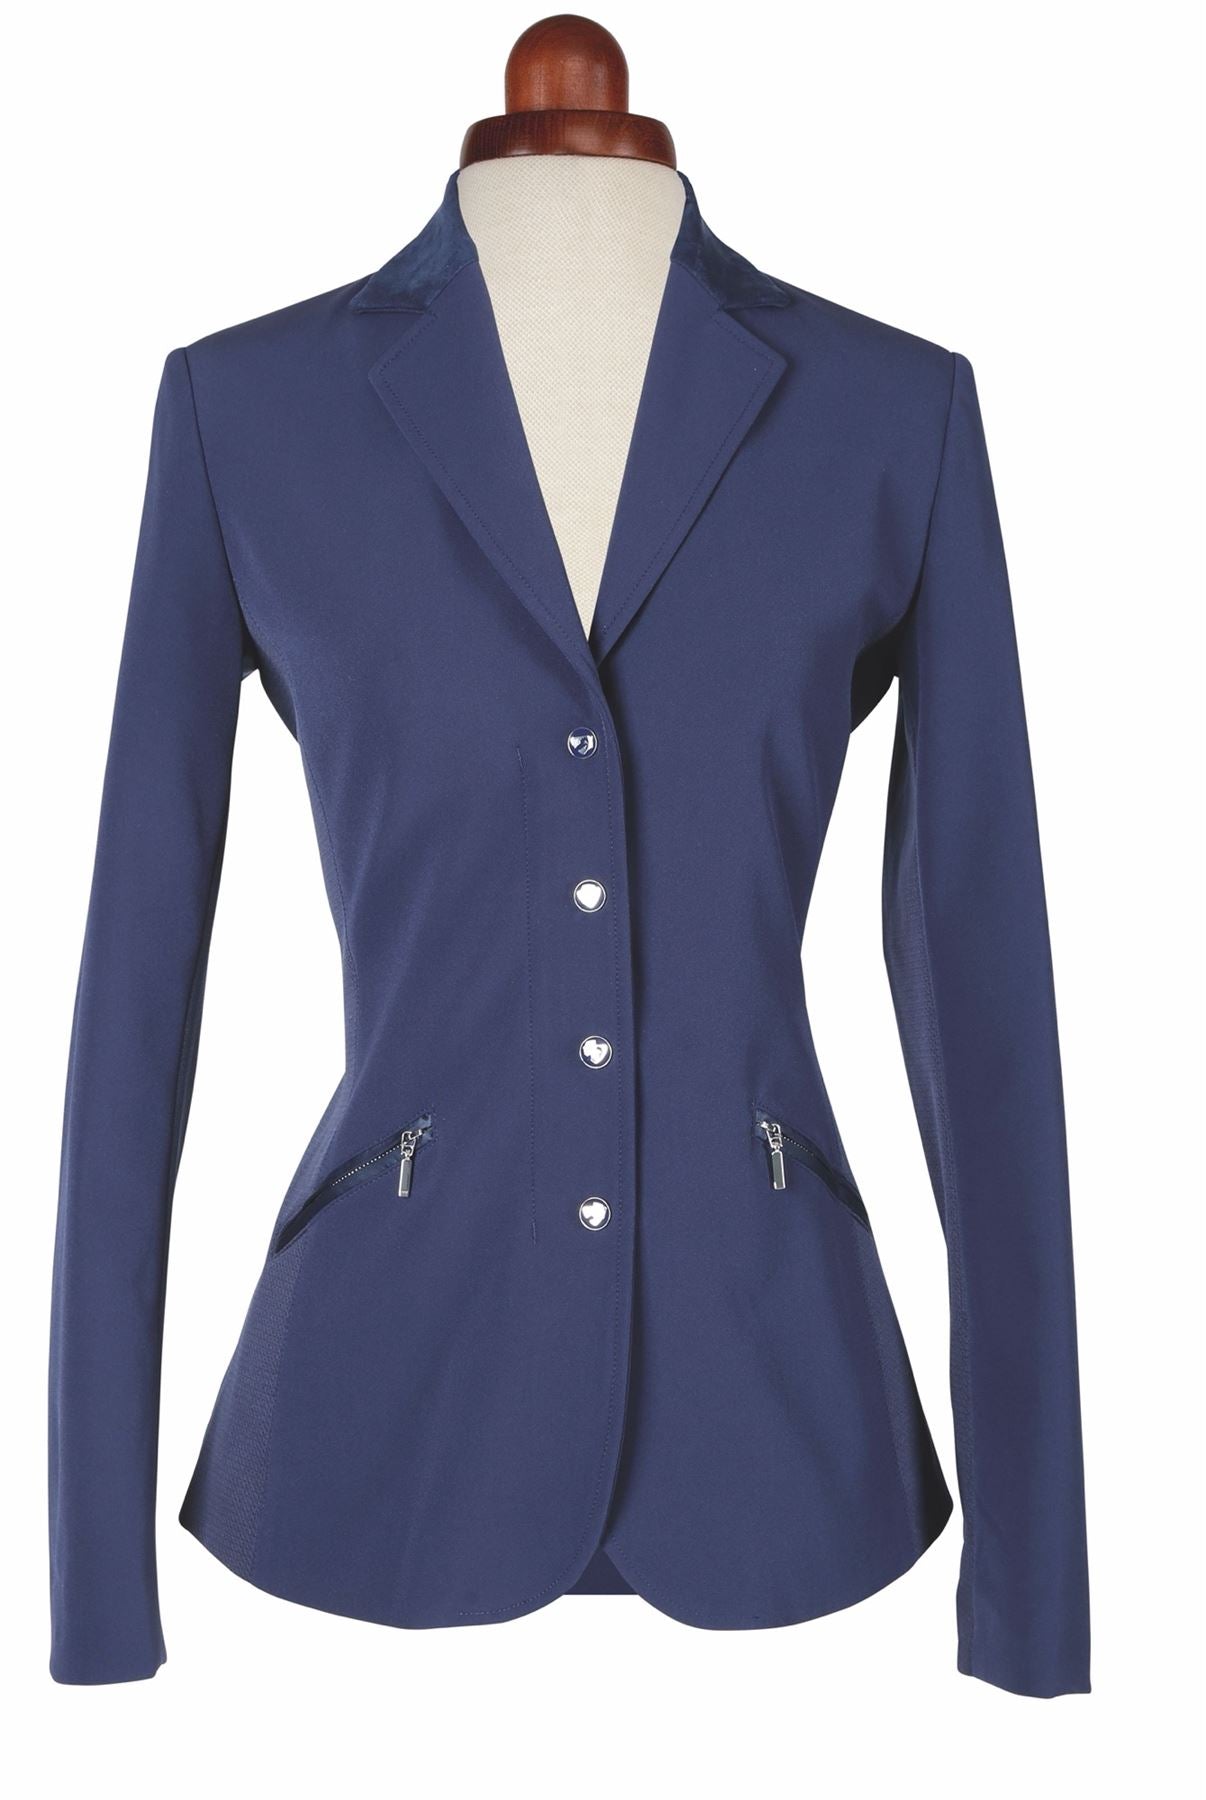 Shires Aubrion Oxford Show Jacket - Ladies - Just Horse Riders